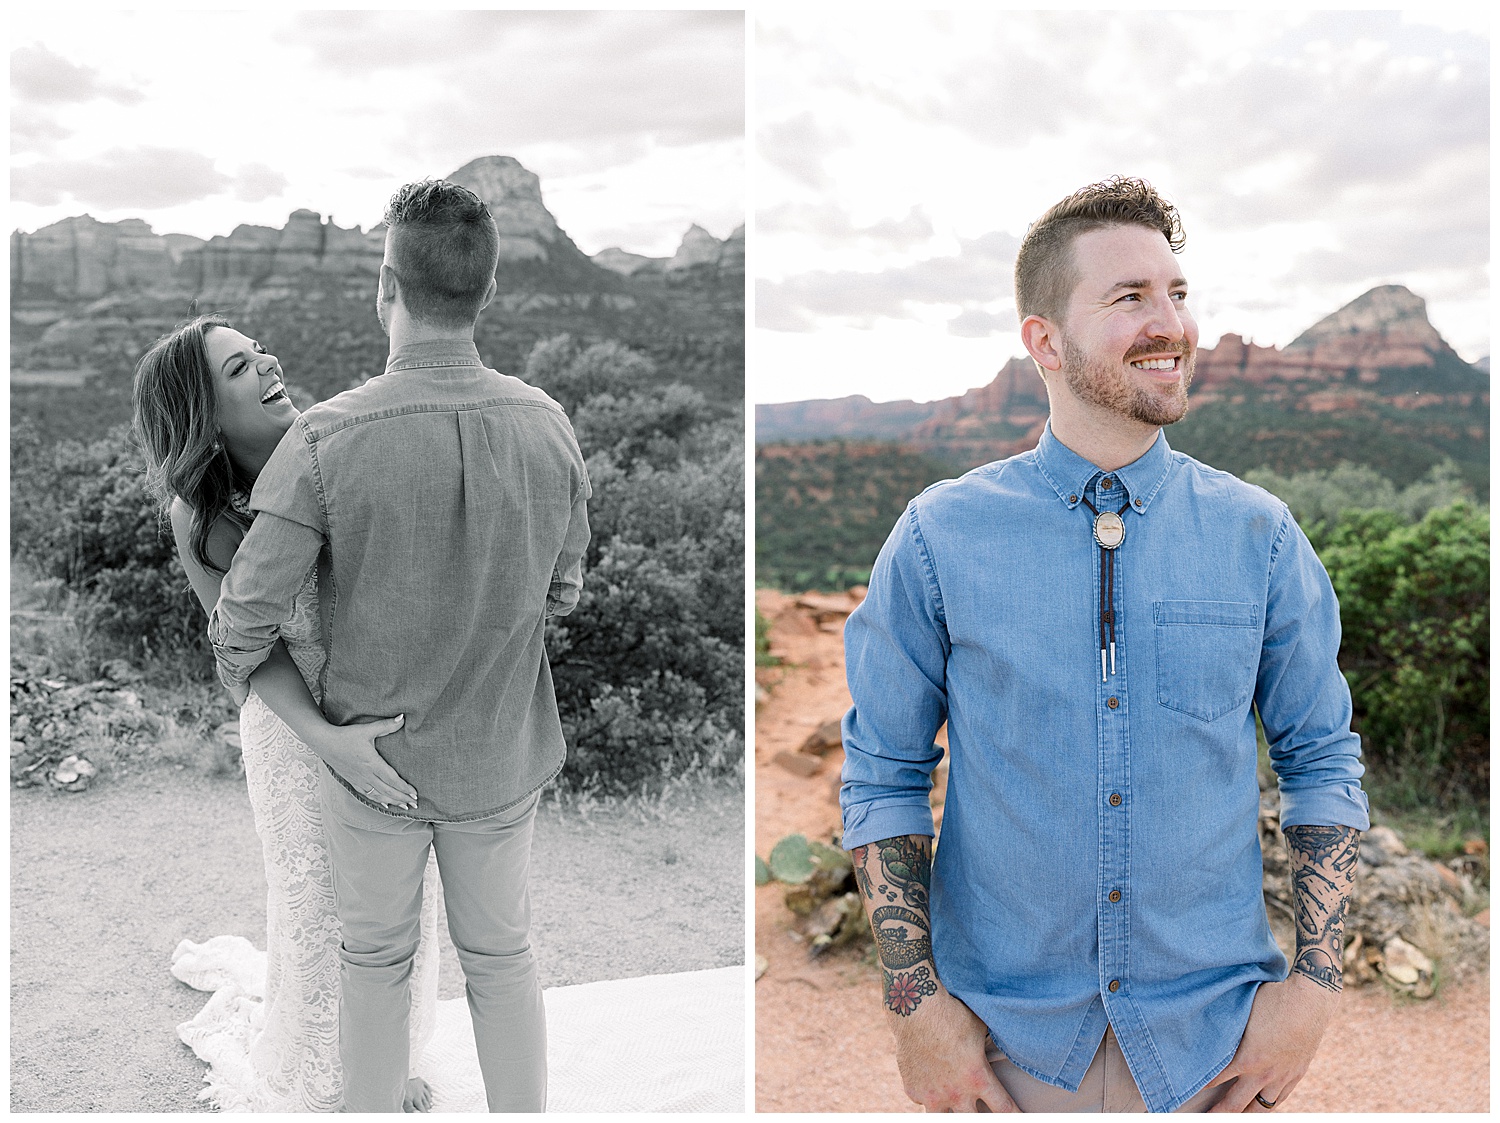 Anniversary Session in Sedona Arizona with cliffside views